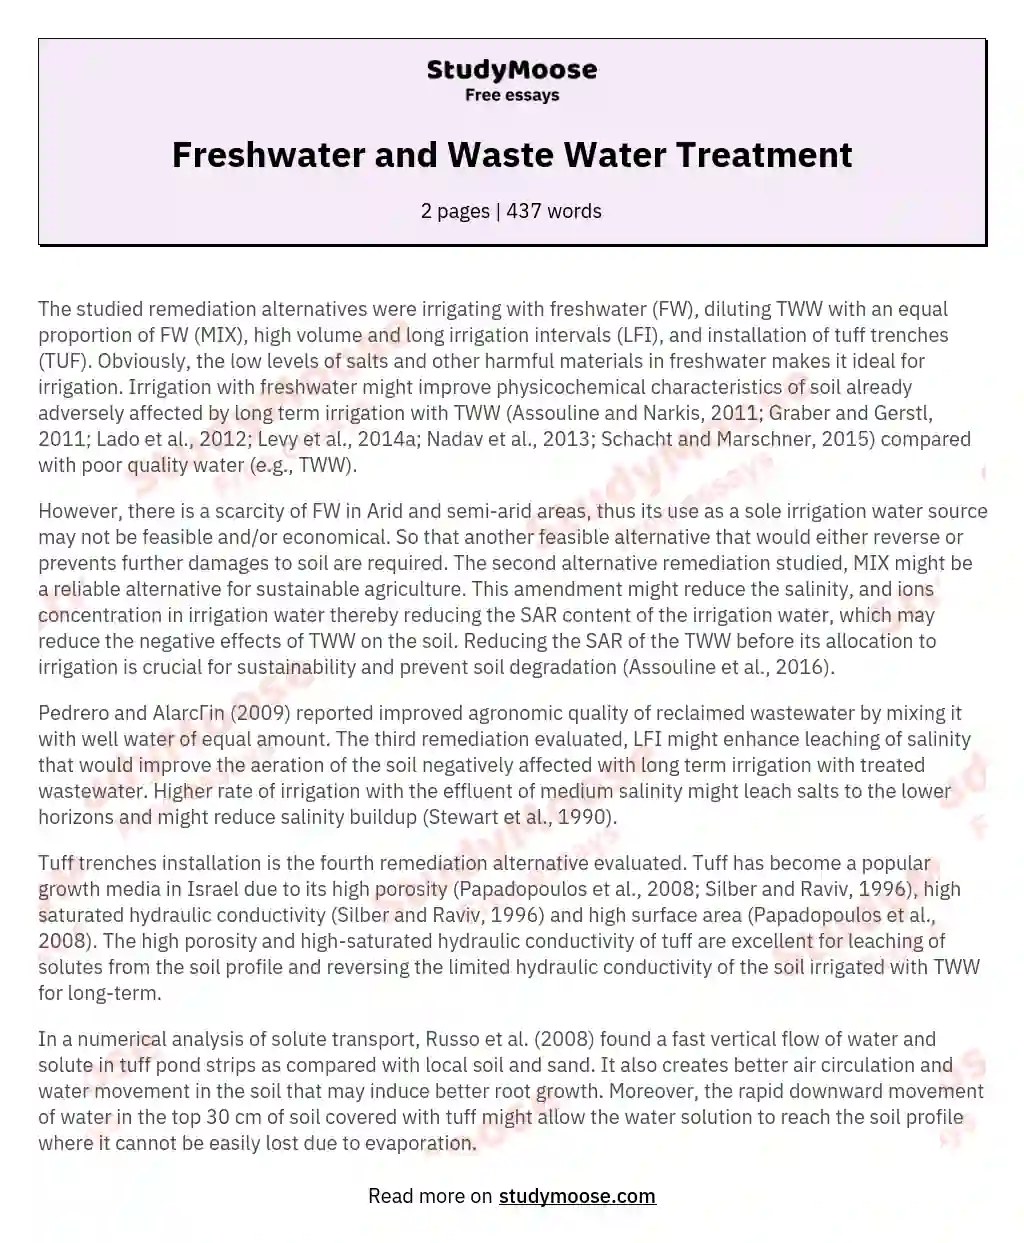 Freshwater and Waste Water Treatment